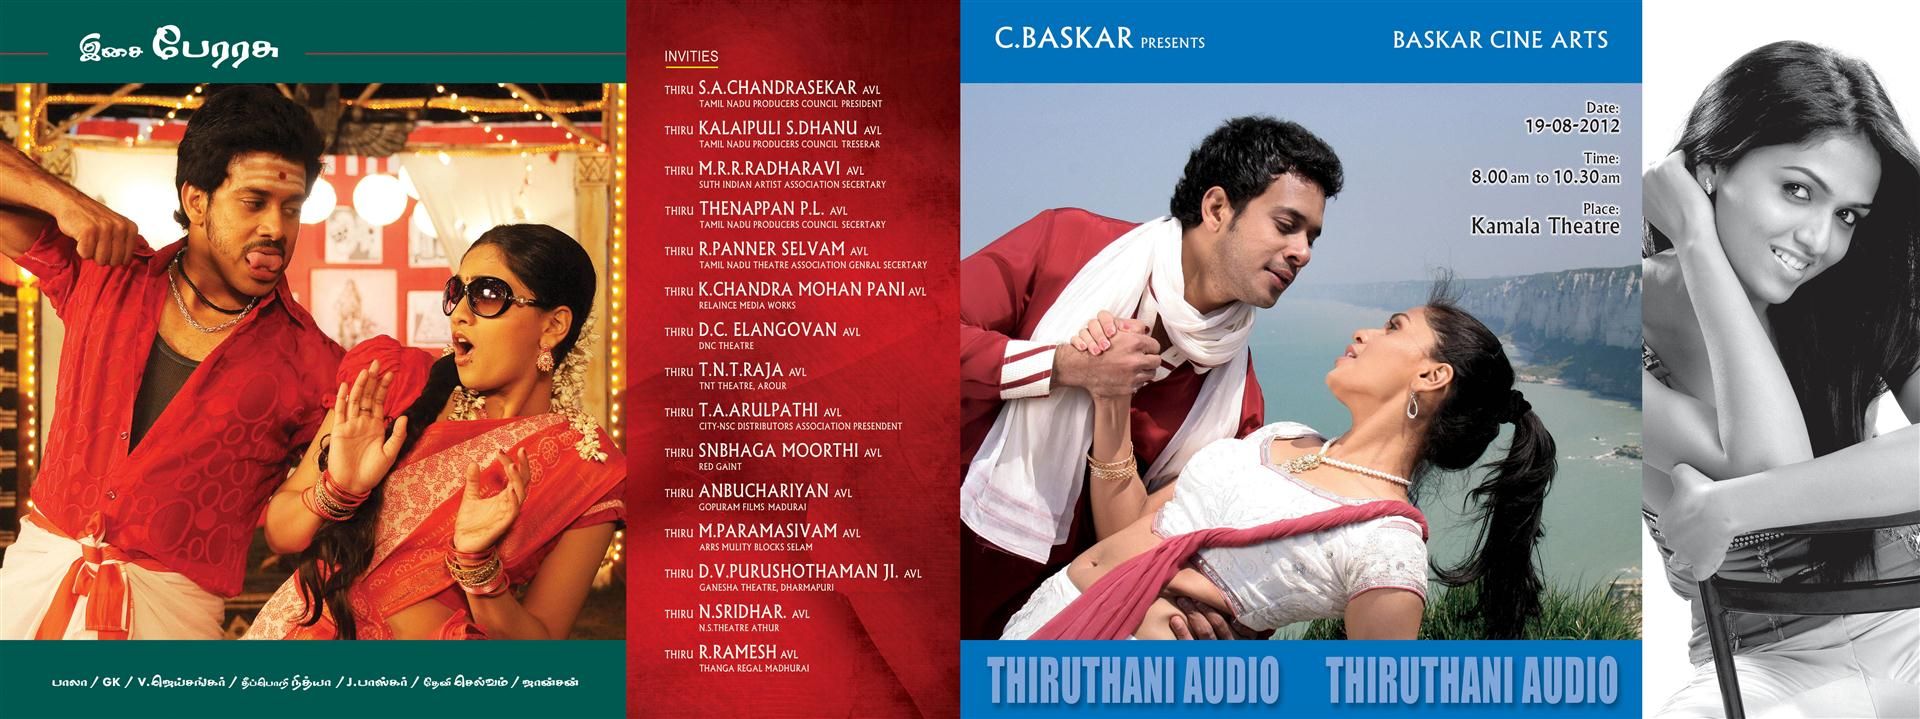 Thiruthani Audio Launch Invitation Posters | Picture 253380